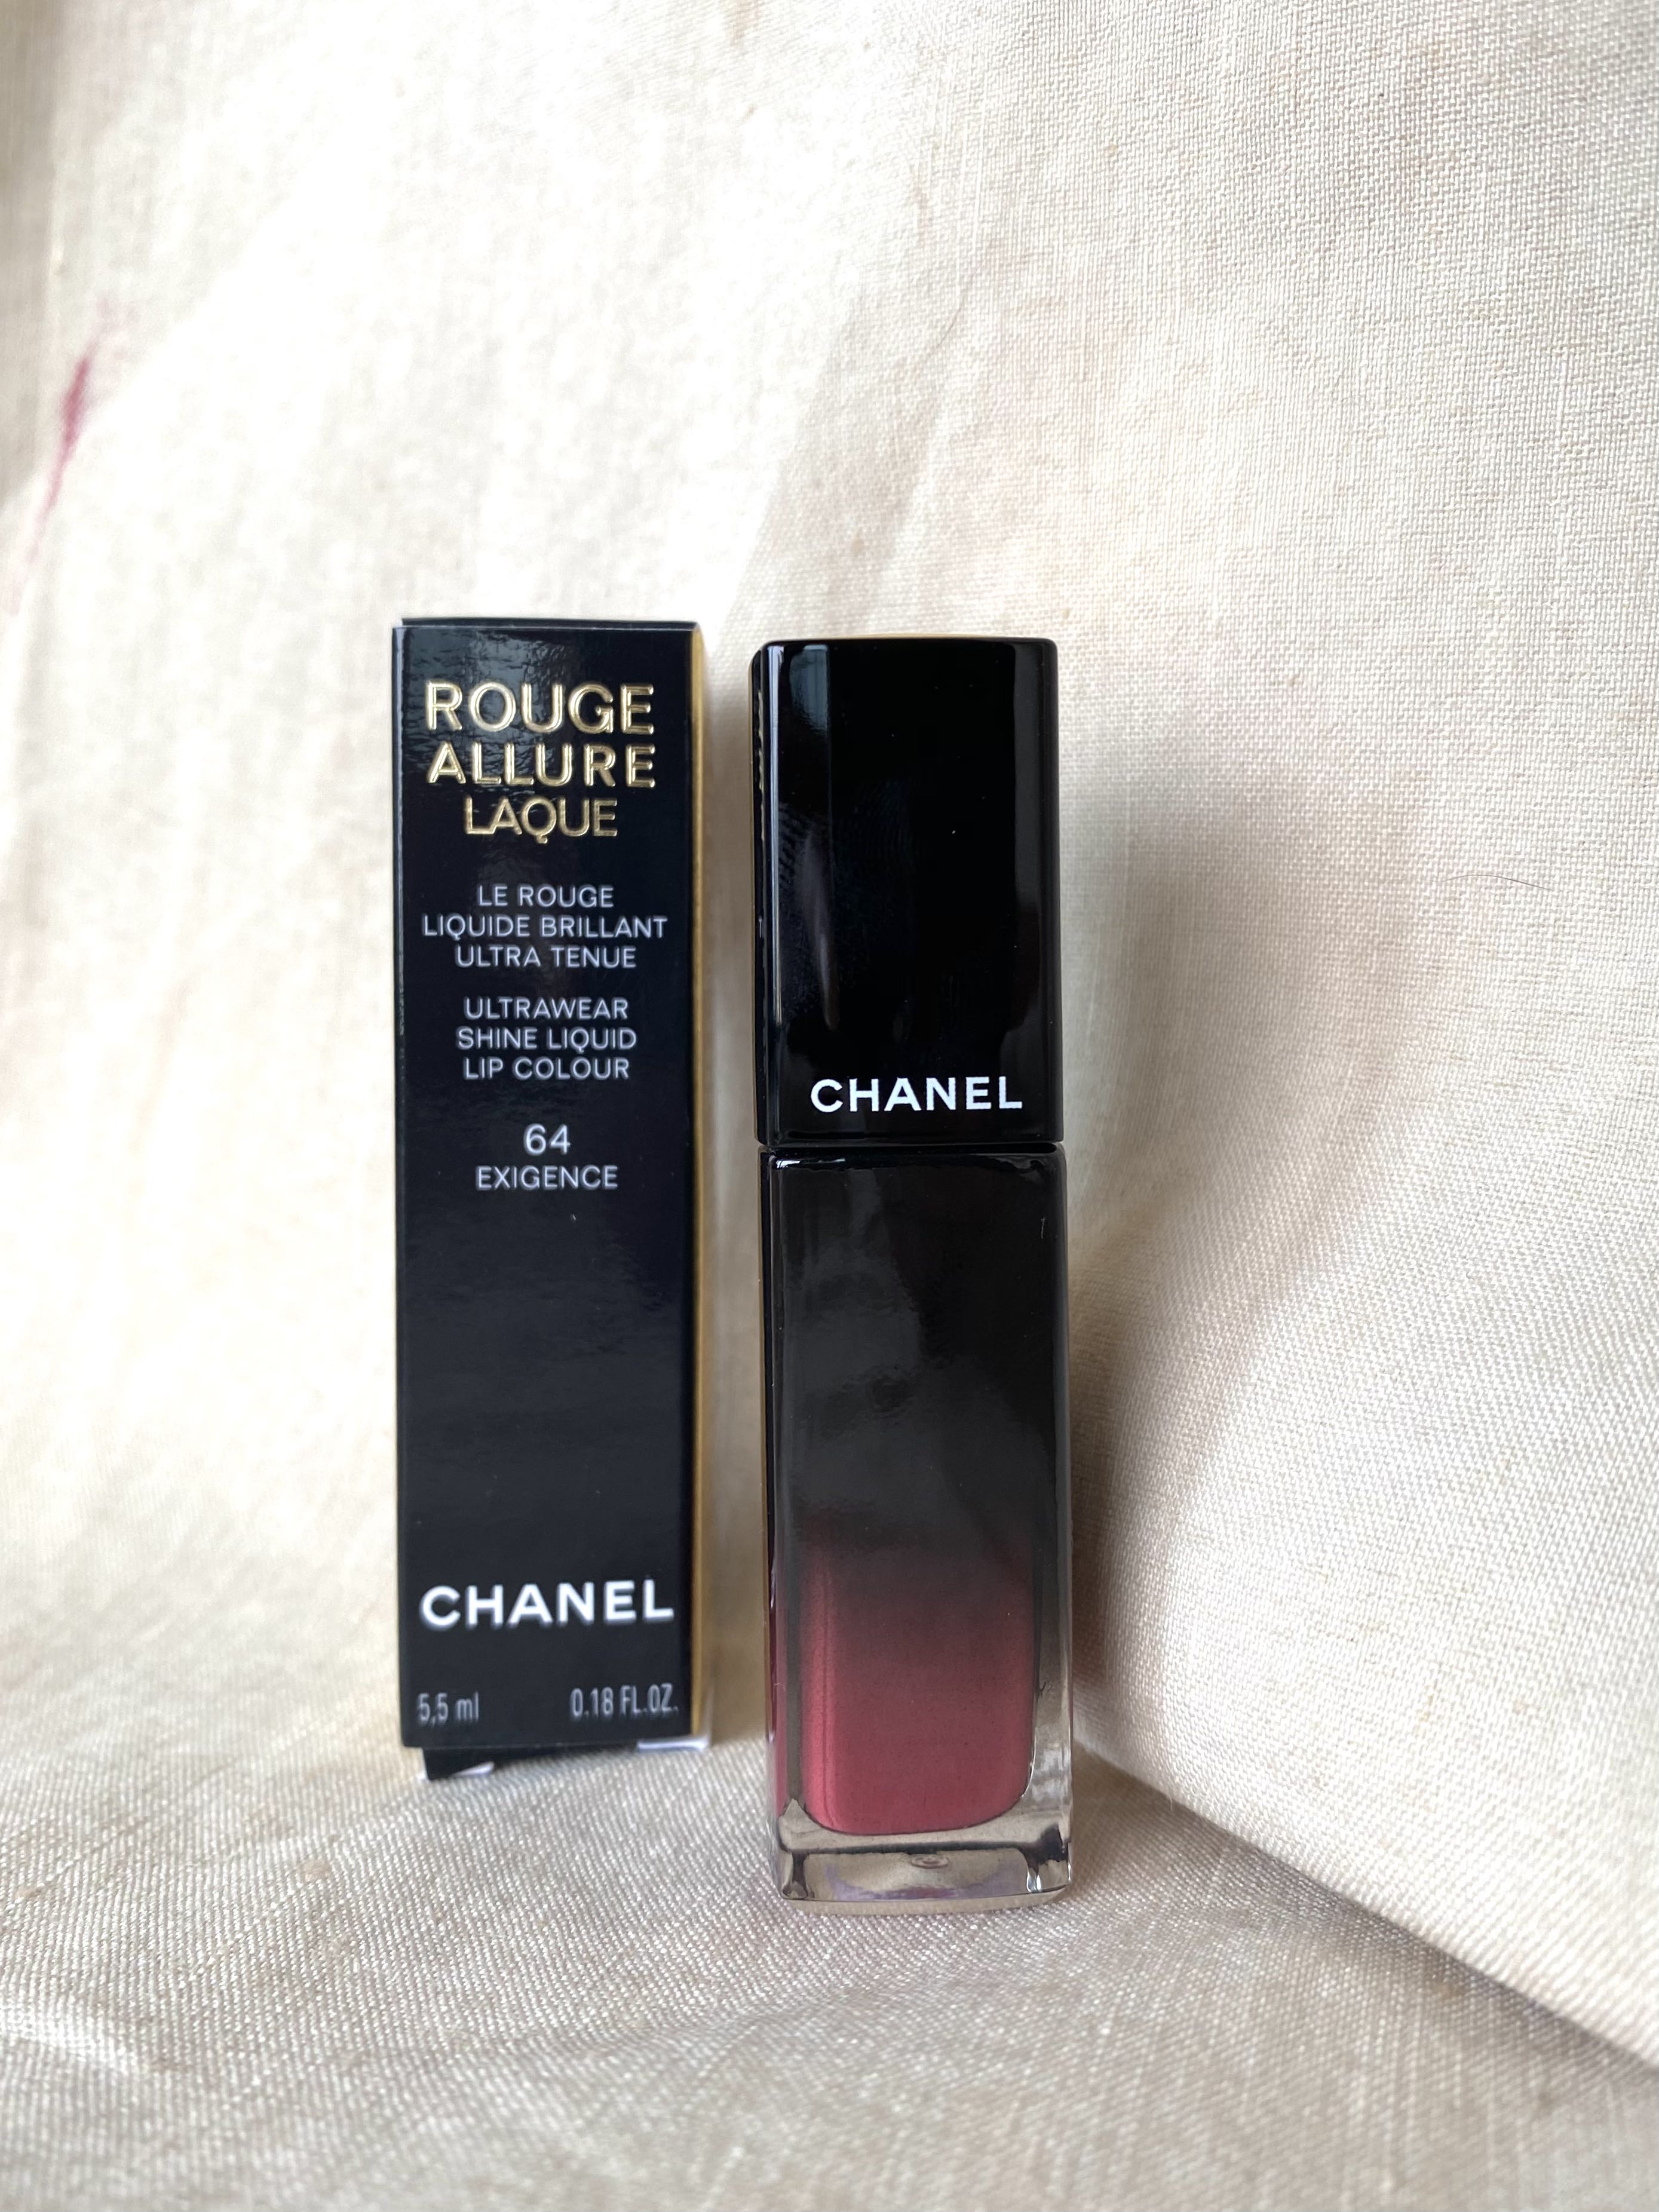 CHANEL ROUGE ALLURE LAQUE 64 EXIGENCE, Beauty & Personal Care